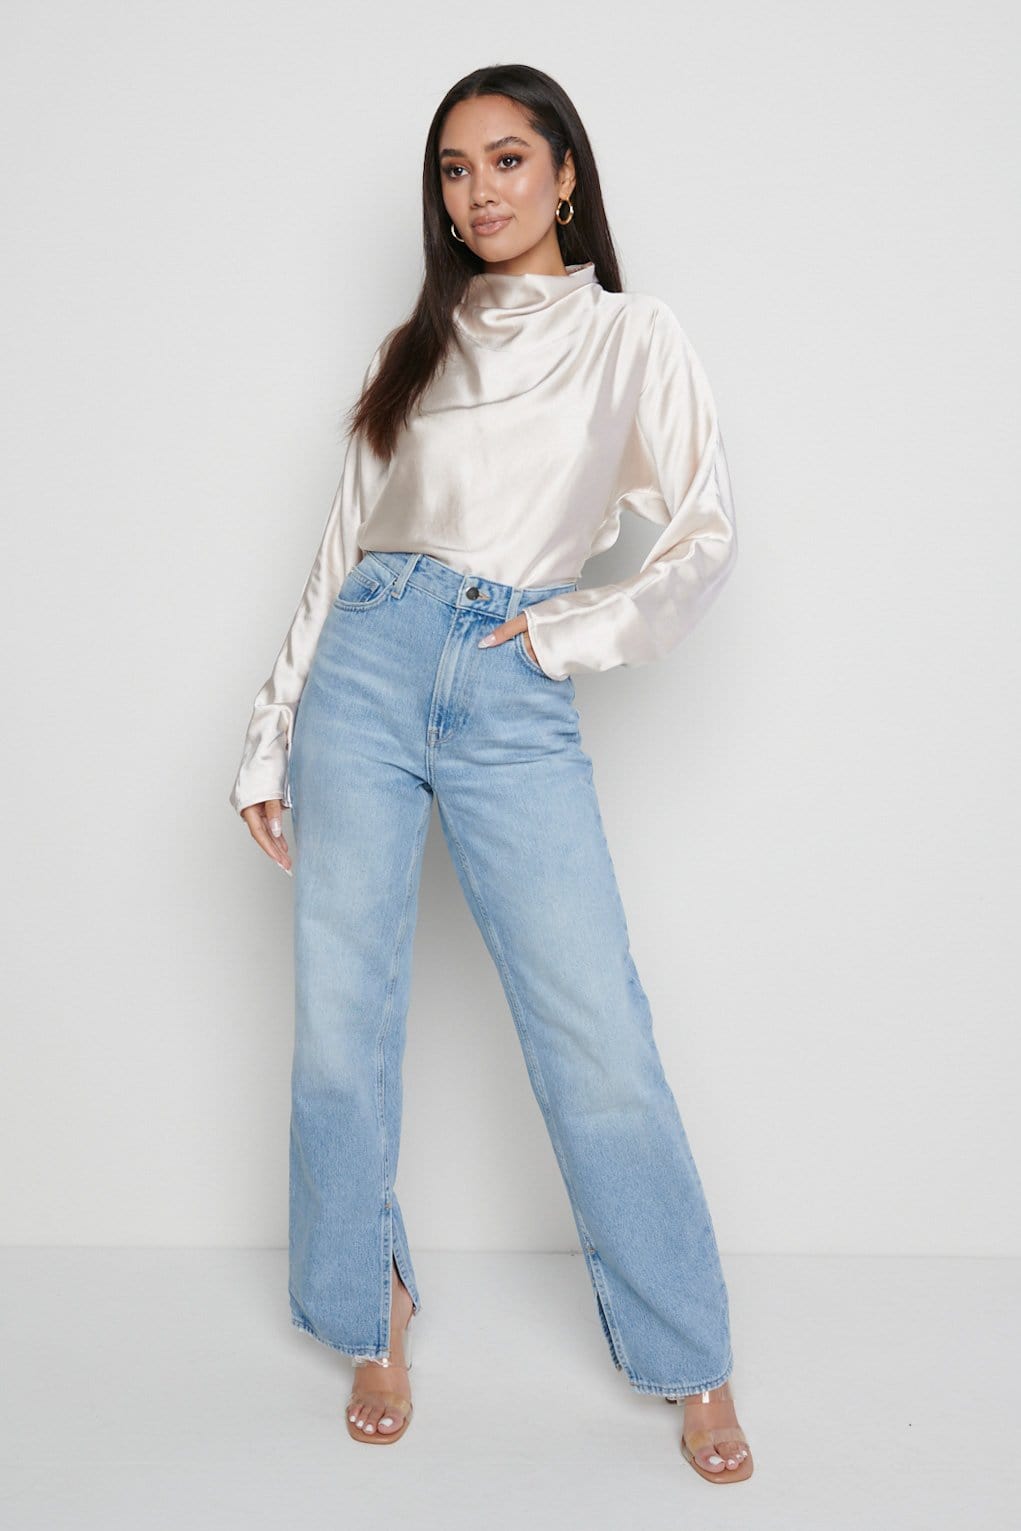 Bonnie High Neck Backless Blouse - Oyster